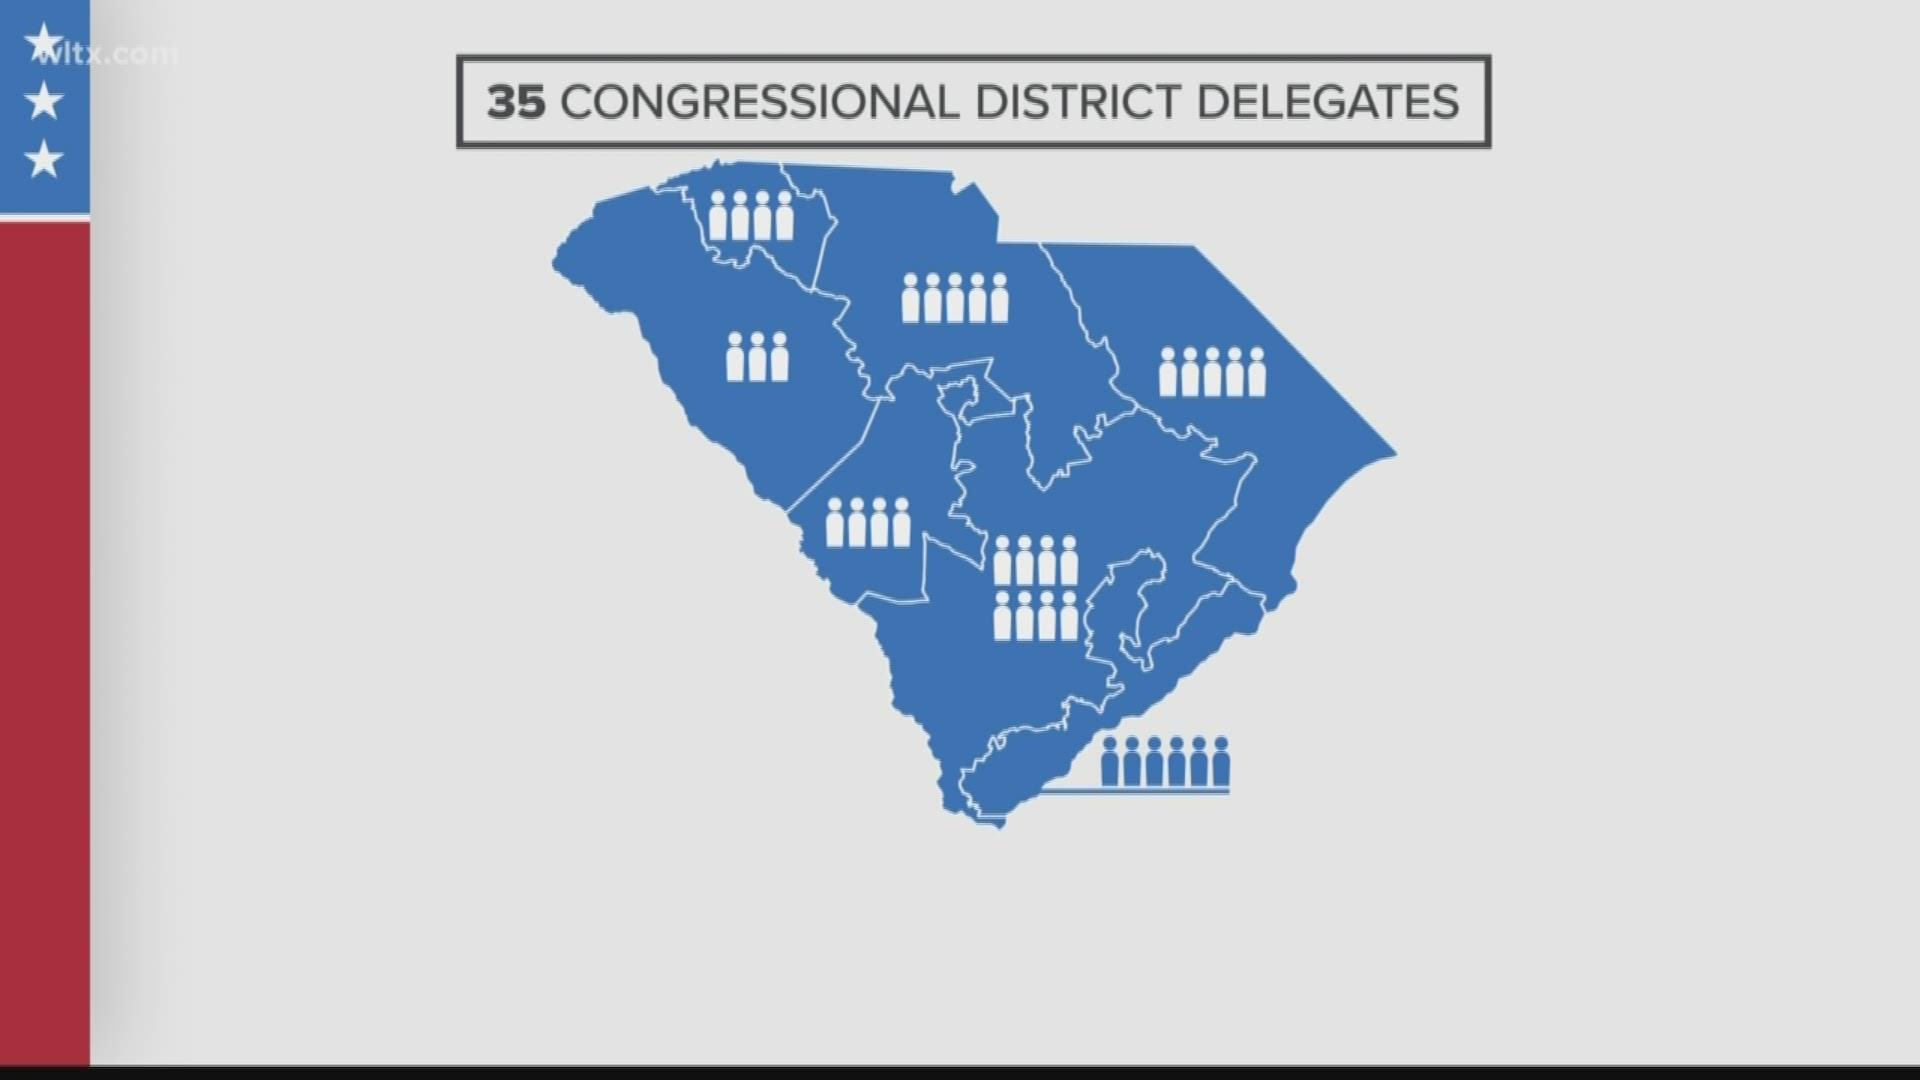 There will be 63 delegates statewide, but they'll be spilt based on voting in congressional districts, party leaders, and other ways.